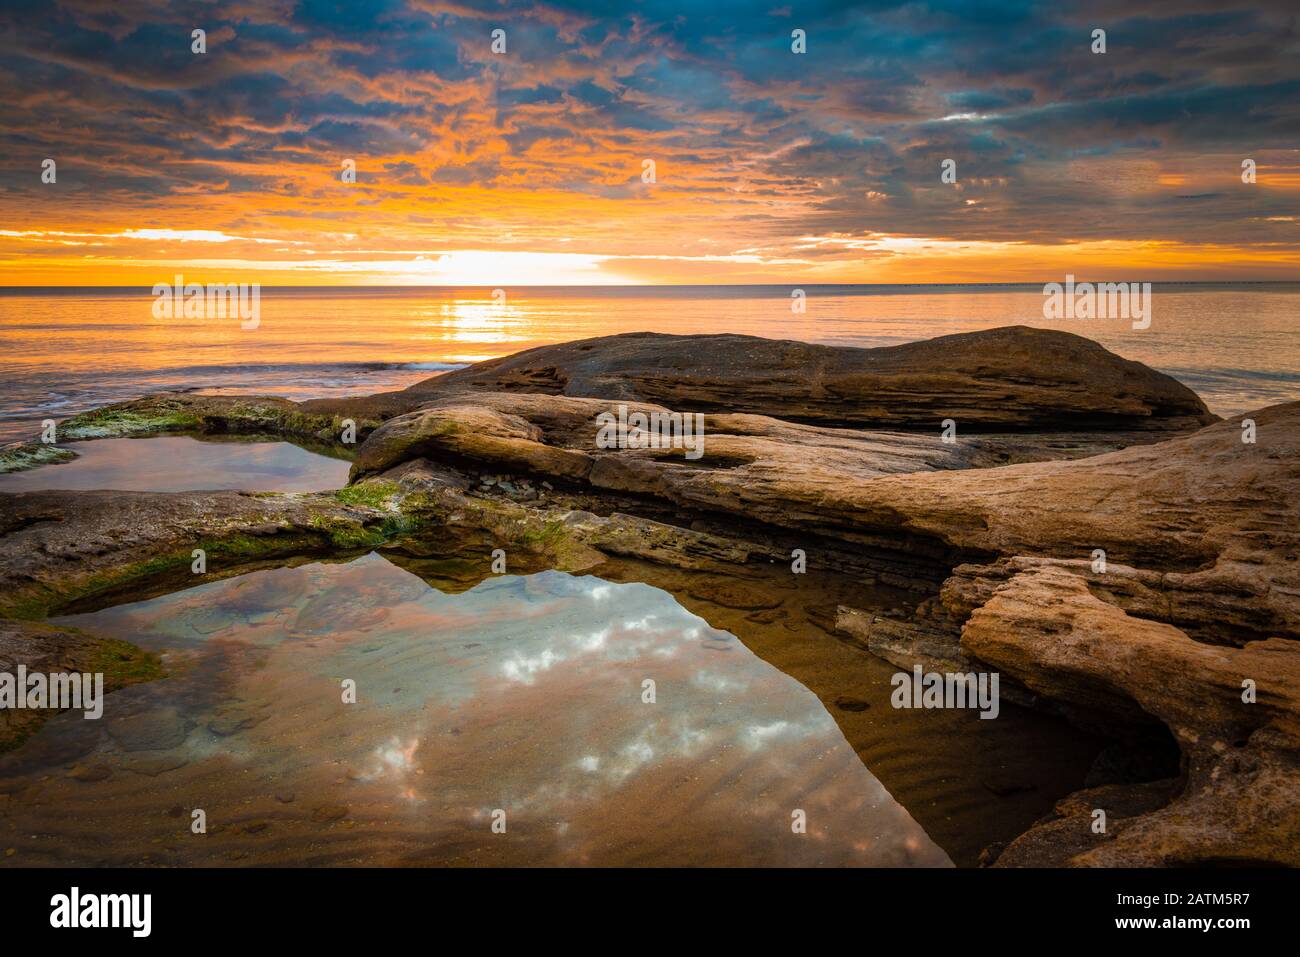 Picturesque sunrise over a rocky beach. Stock Photo